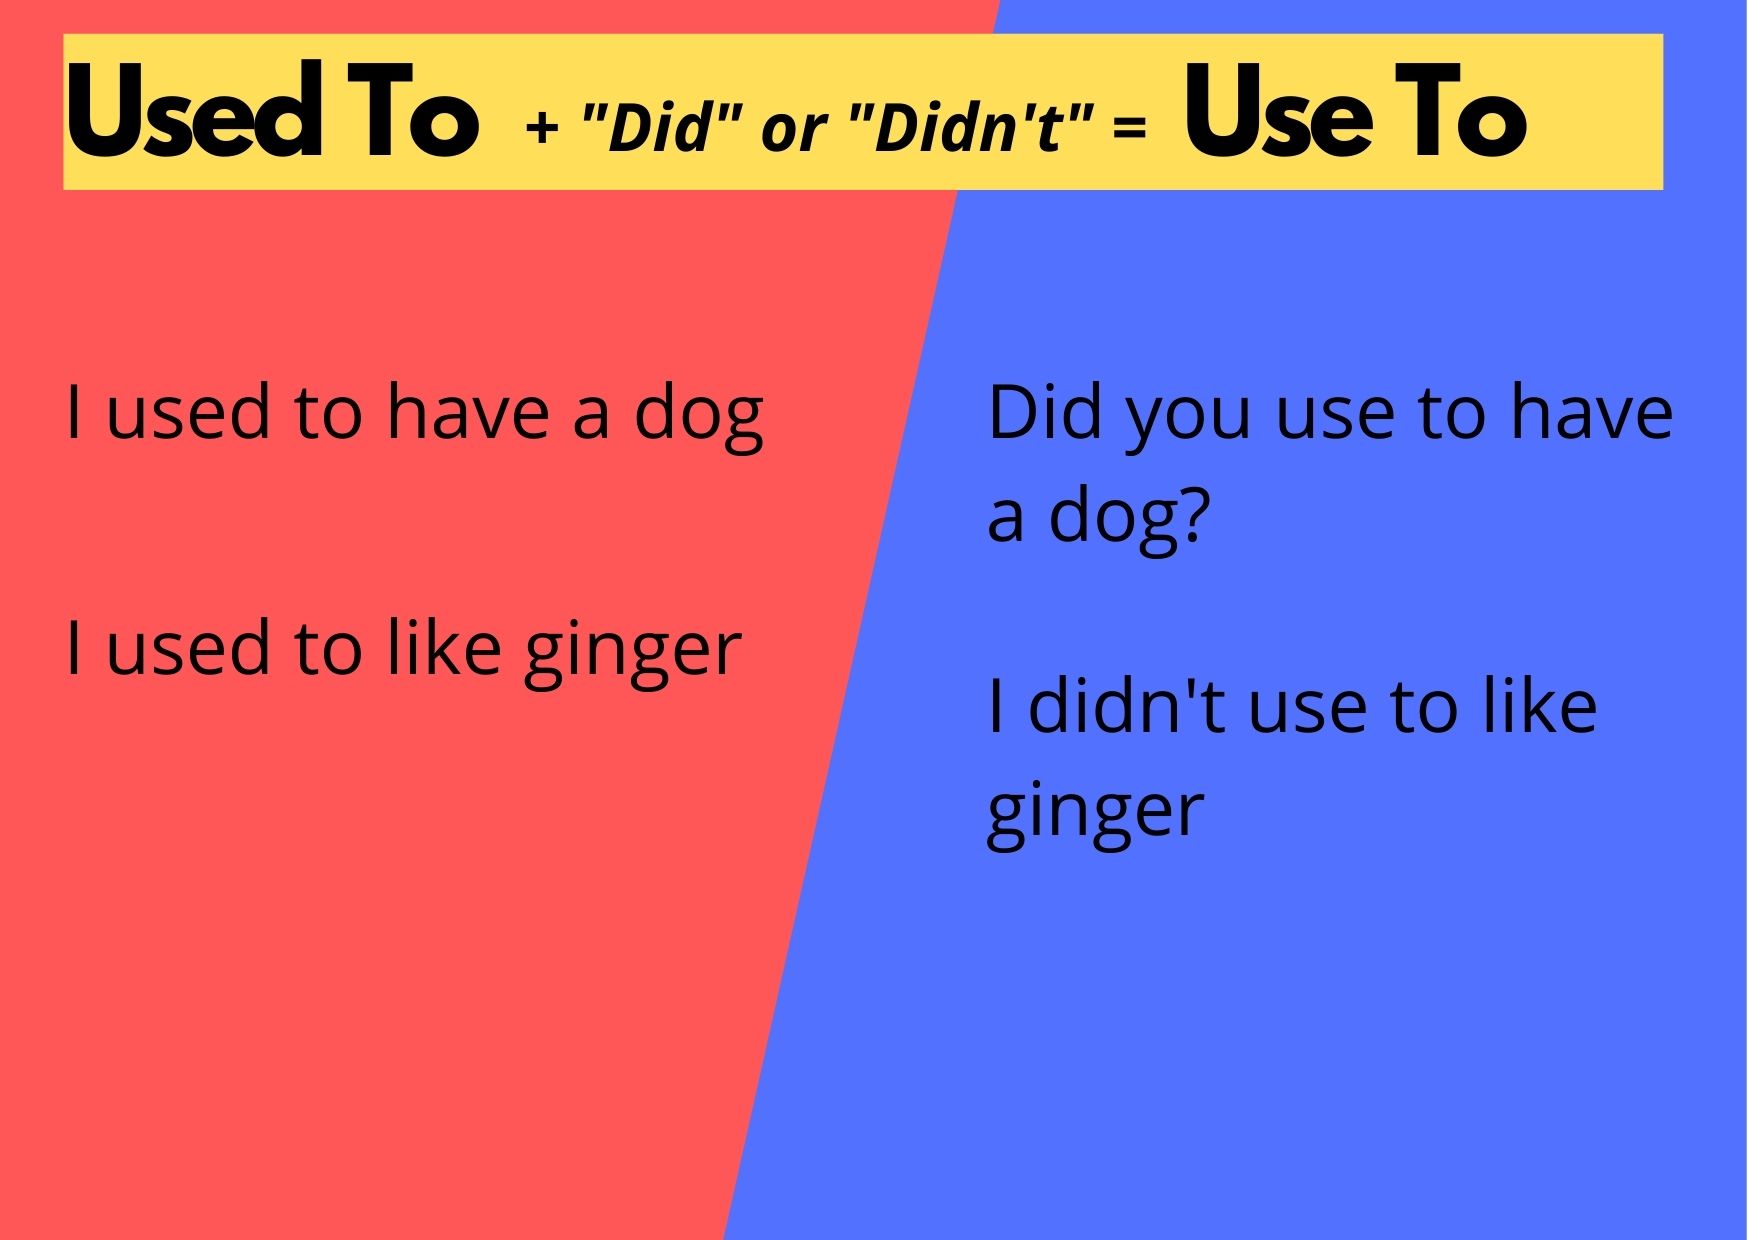 Graphic addressing use to or used to. Used to becomes use to when paired with did or didn't